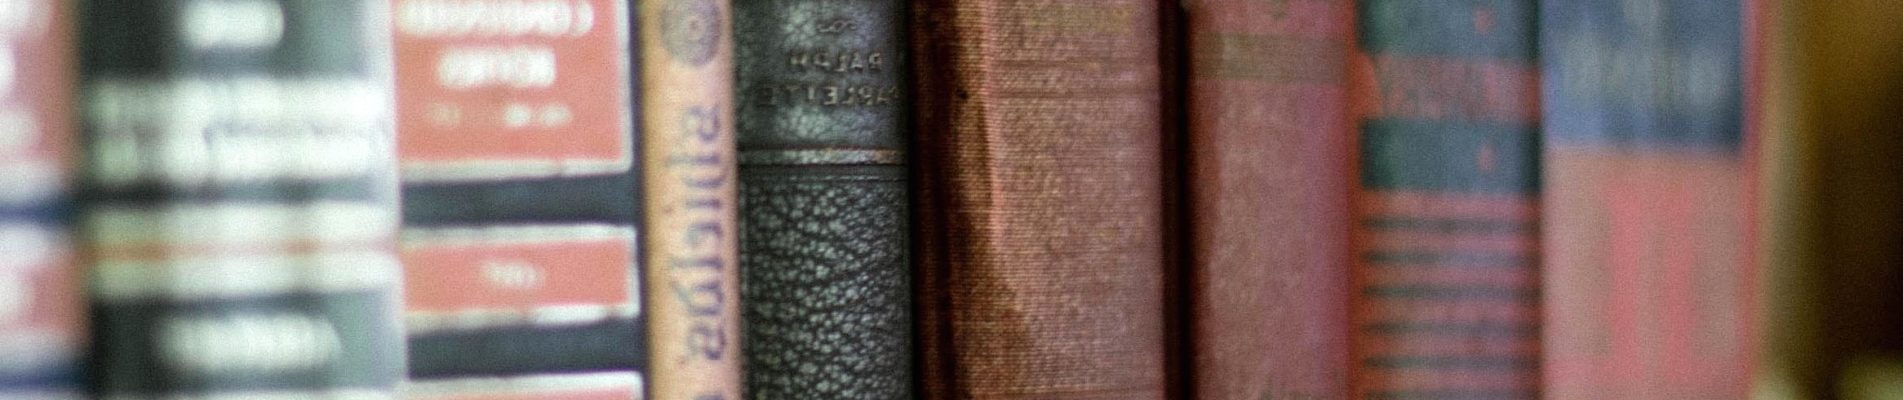 Collections of scientific works